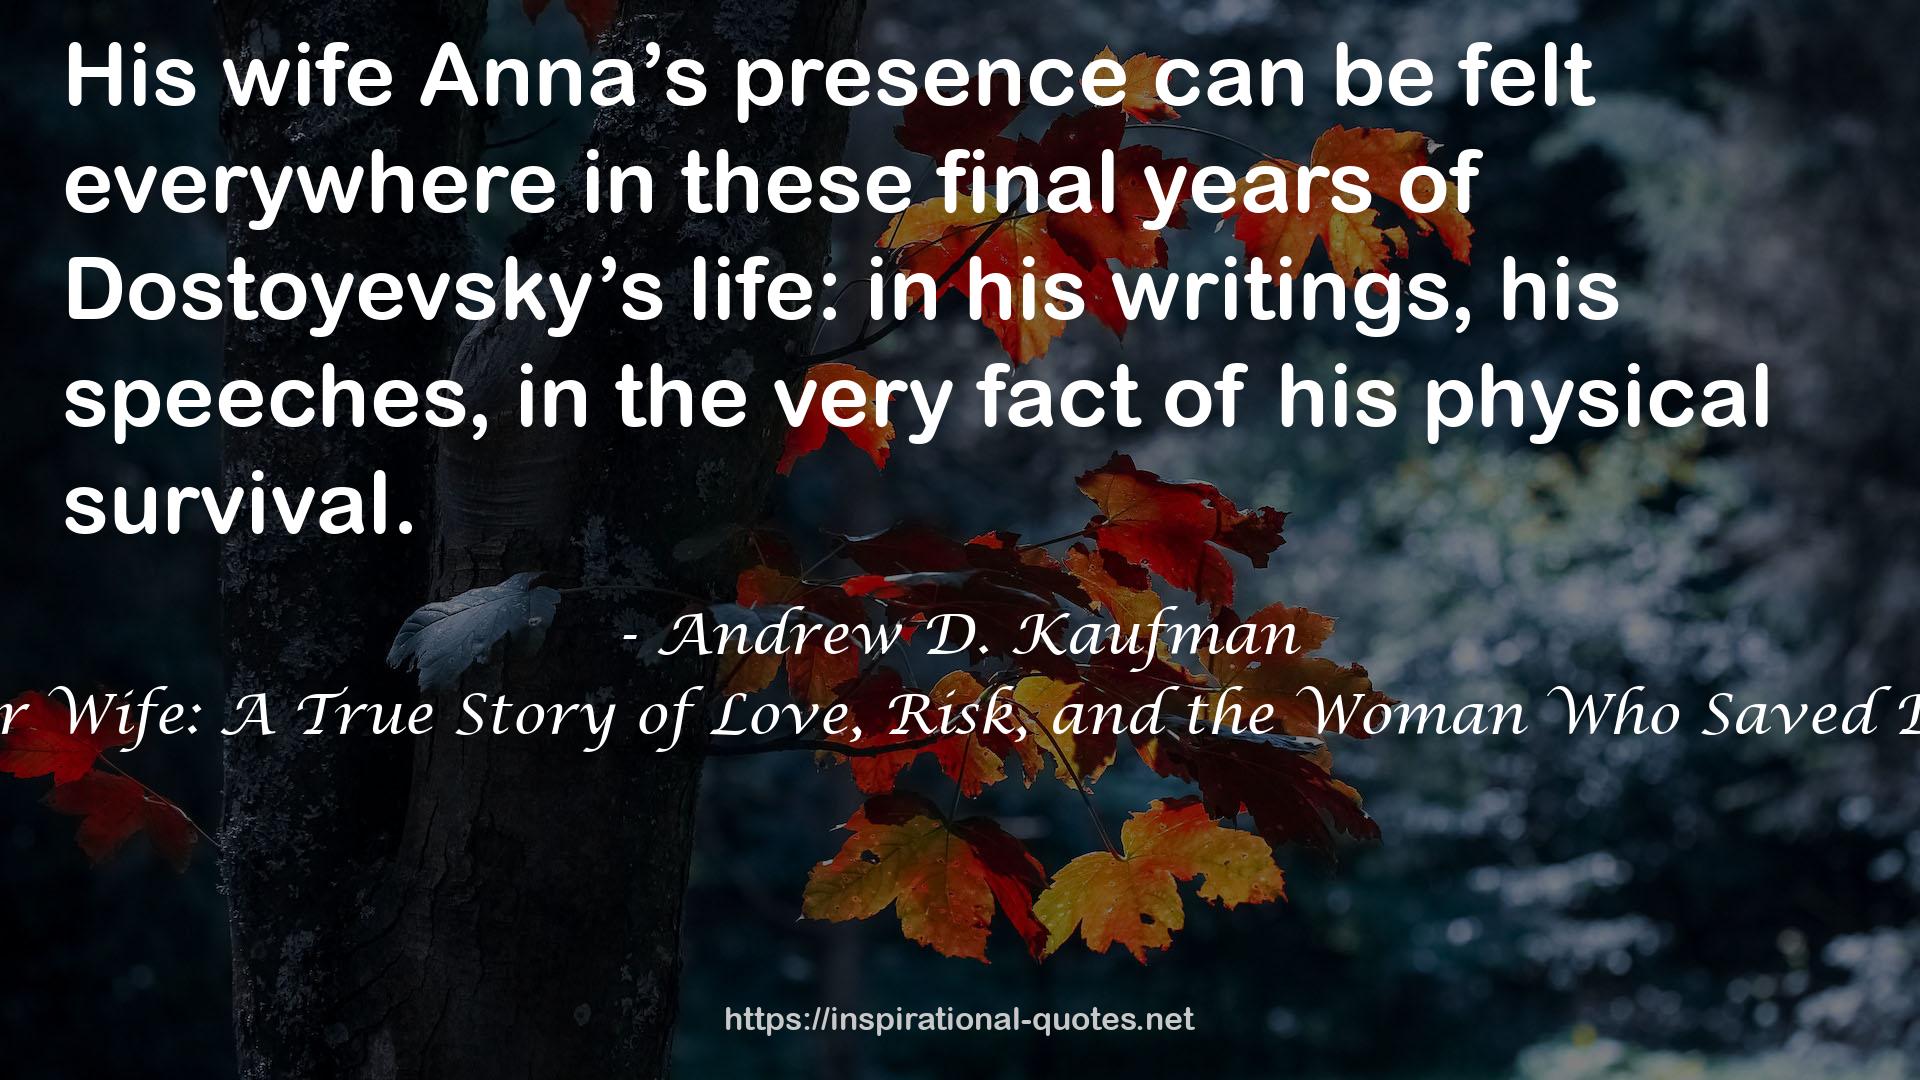 The Gambler Wife: A True Story of Love, Risk, and the Woman Who Saved Dostoyevsky QUOTES